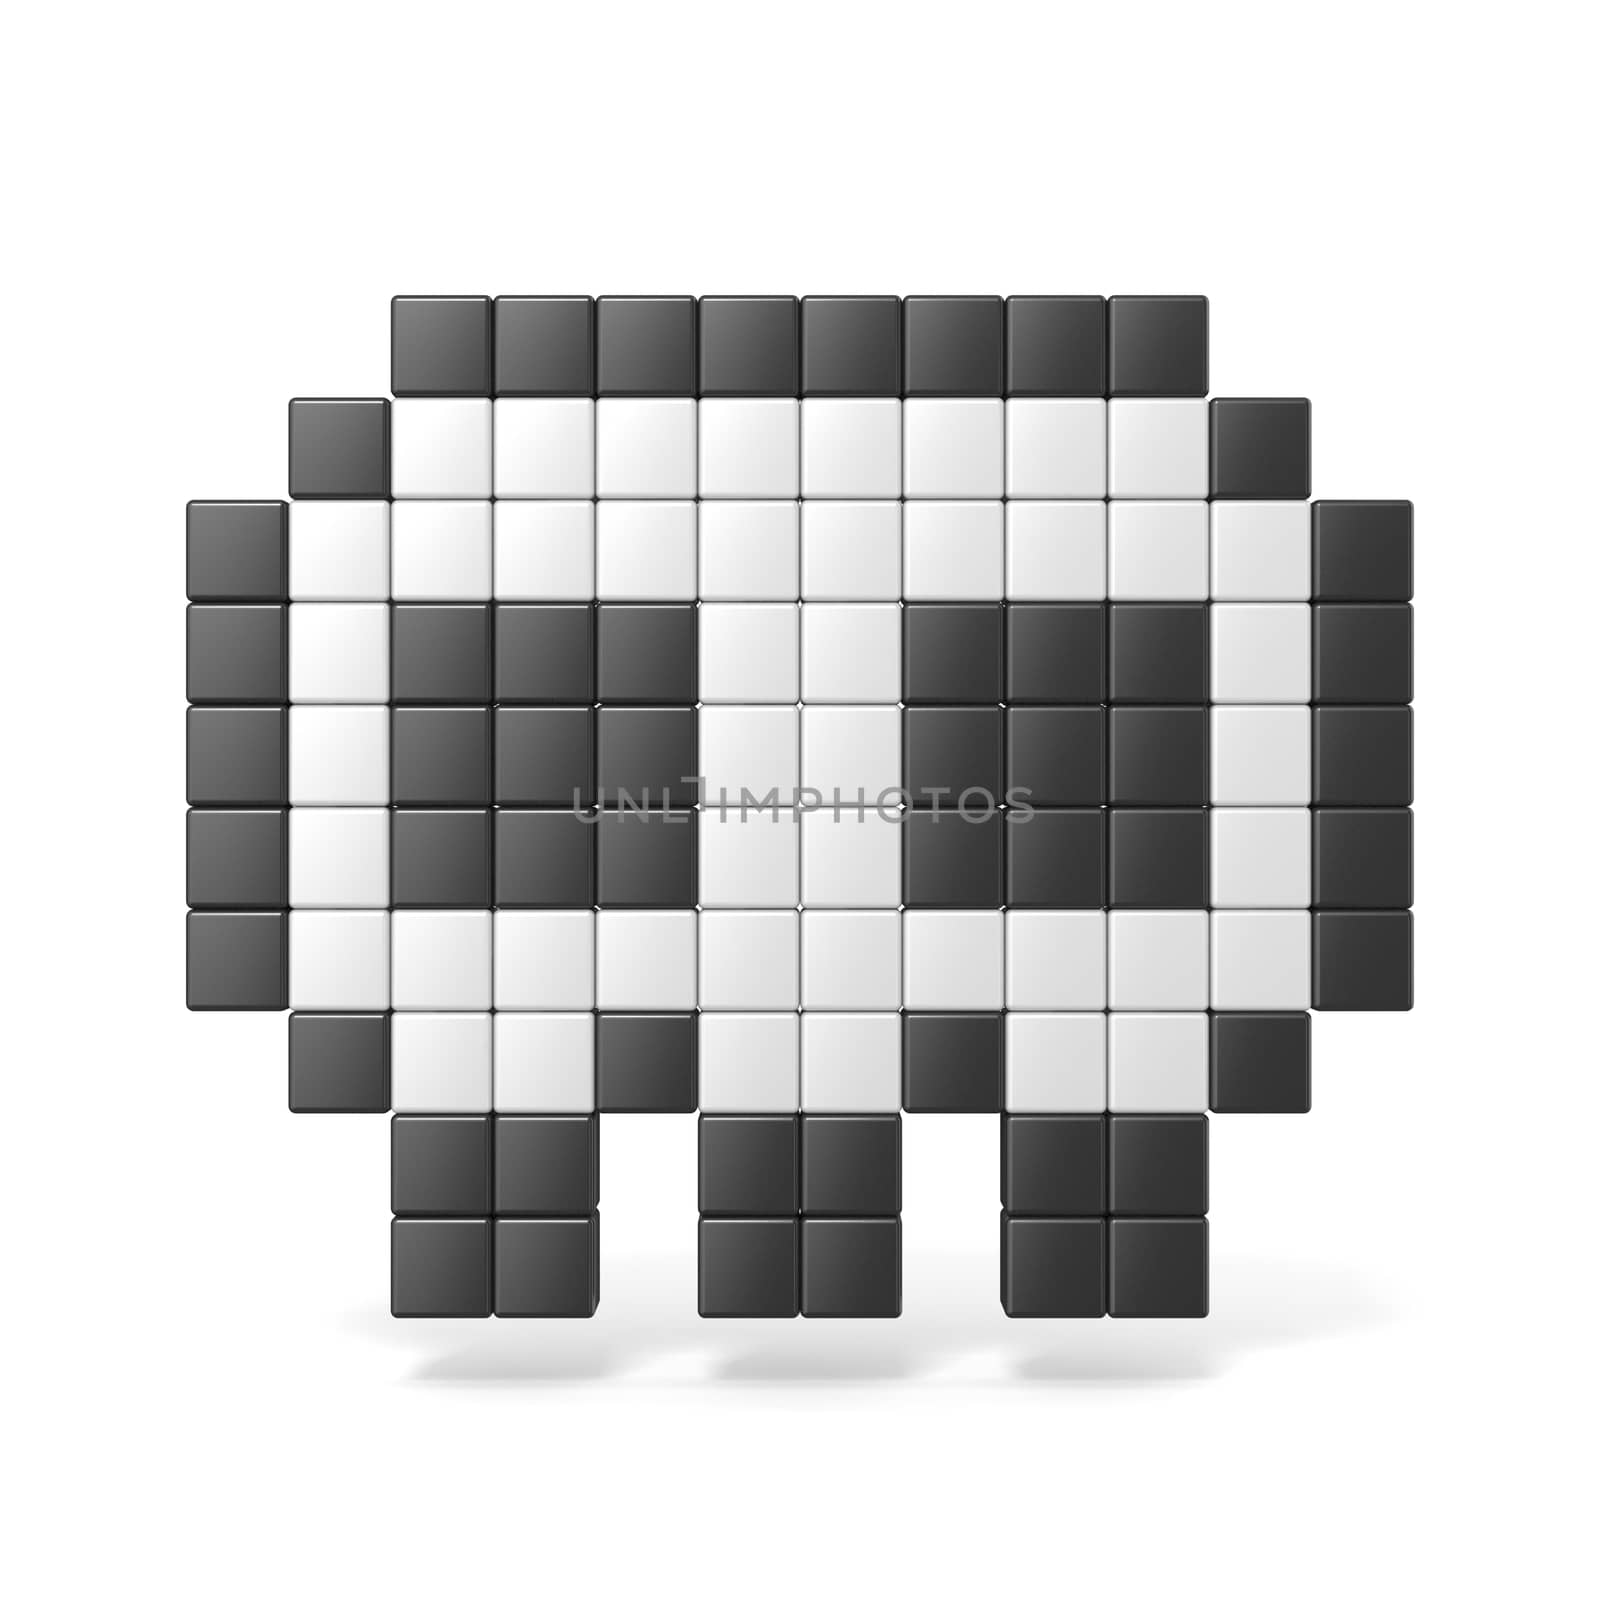 Pixelated 8bit skull icon. Front view. 3D render illustration isolated on white background